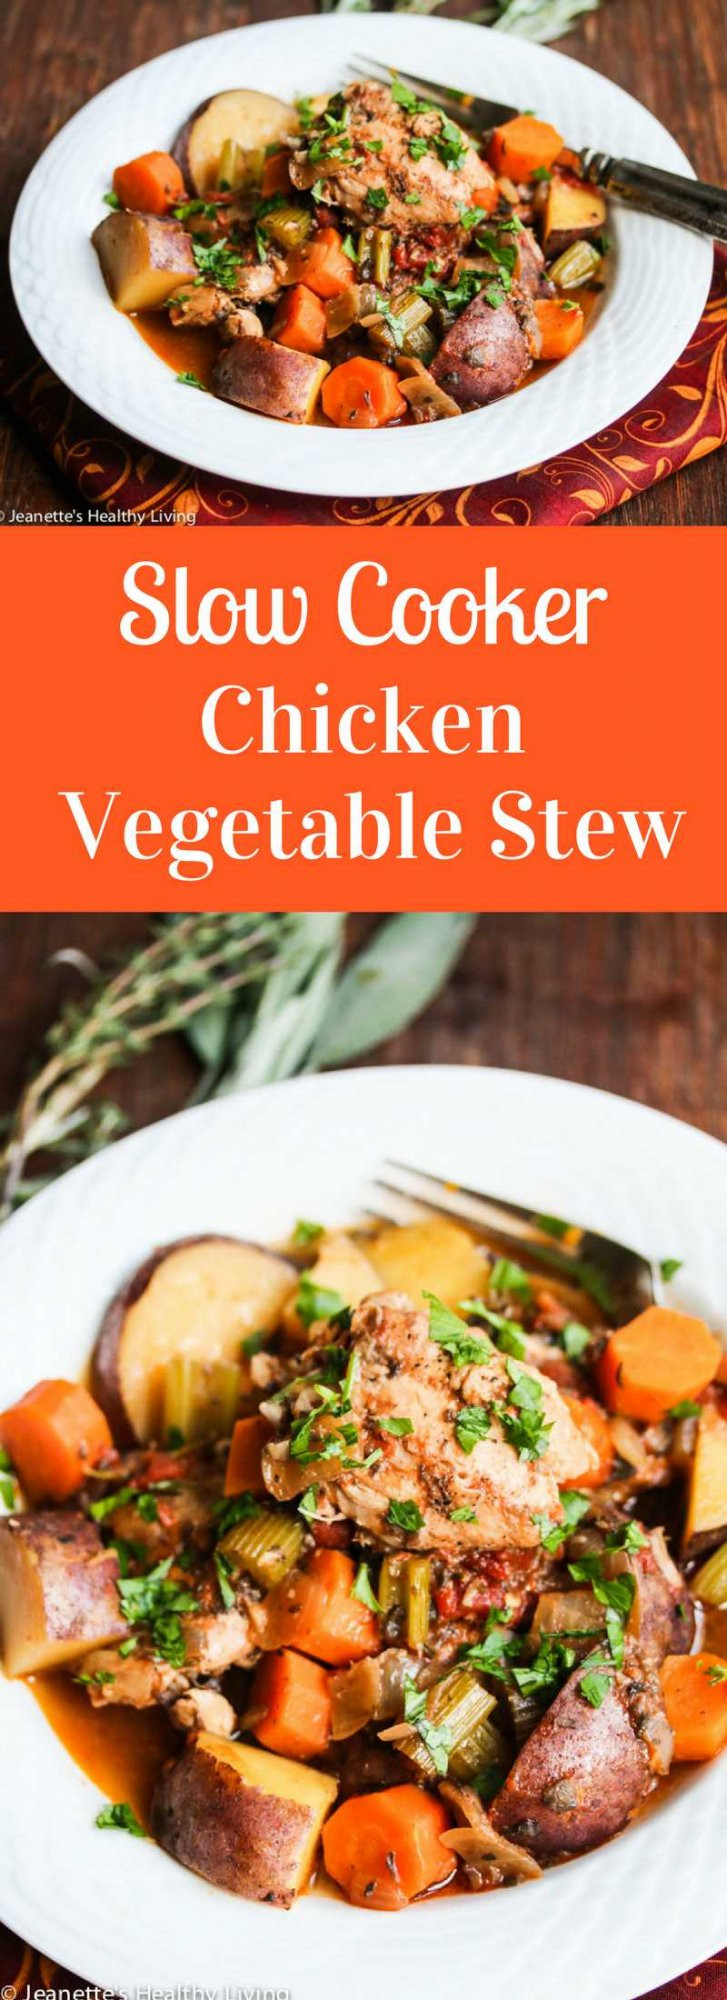 Recipe For Chicken Stew With Vegetables
 Slow Cooker Chicken Ve able Stew Recipe Jeanette s